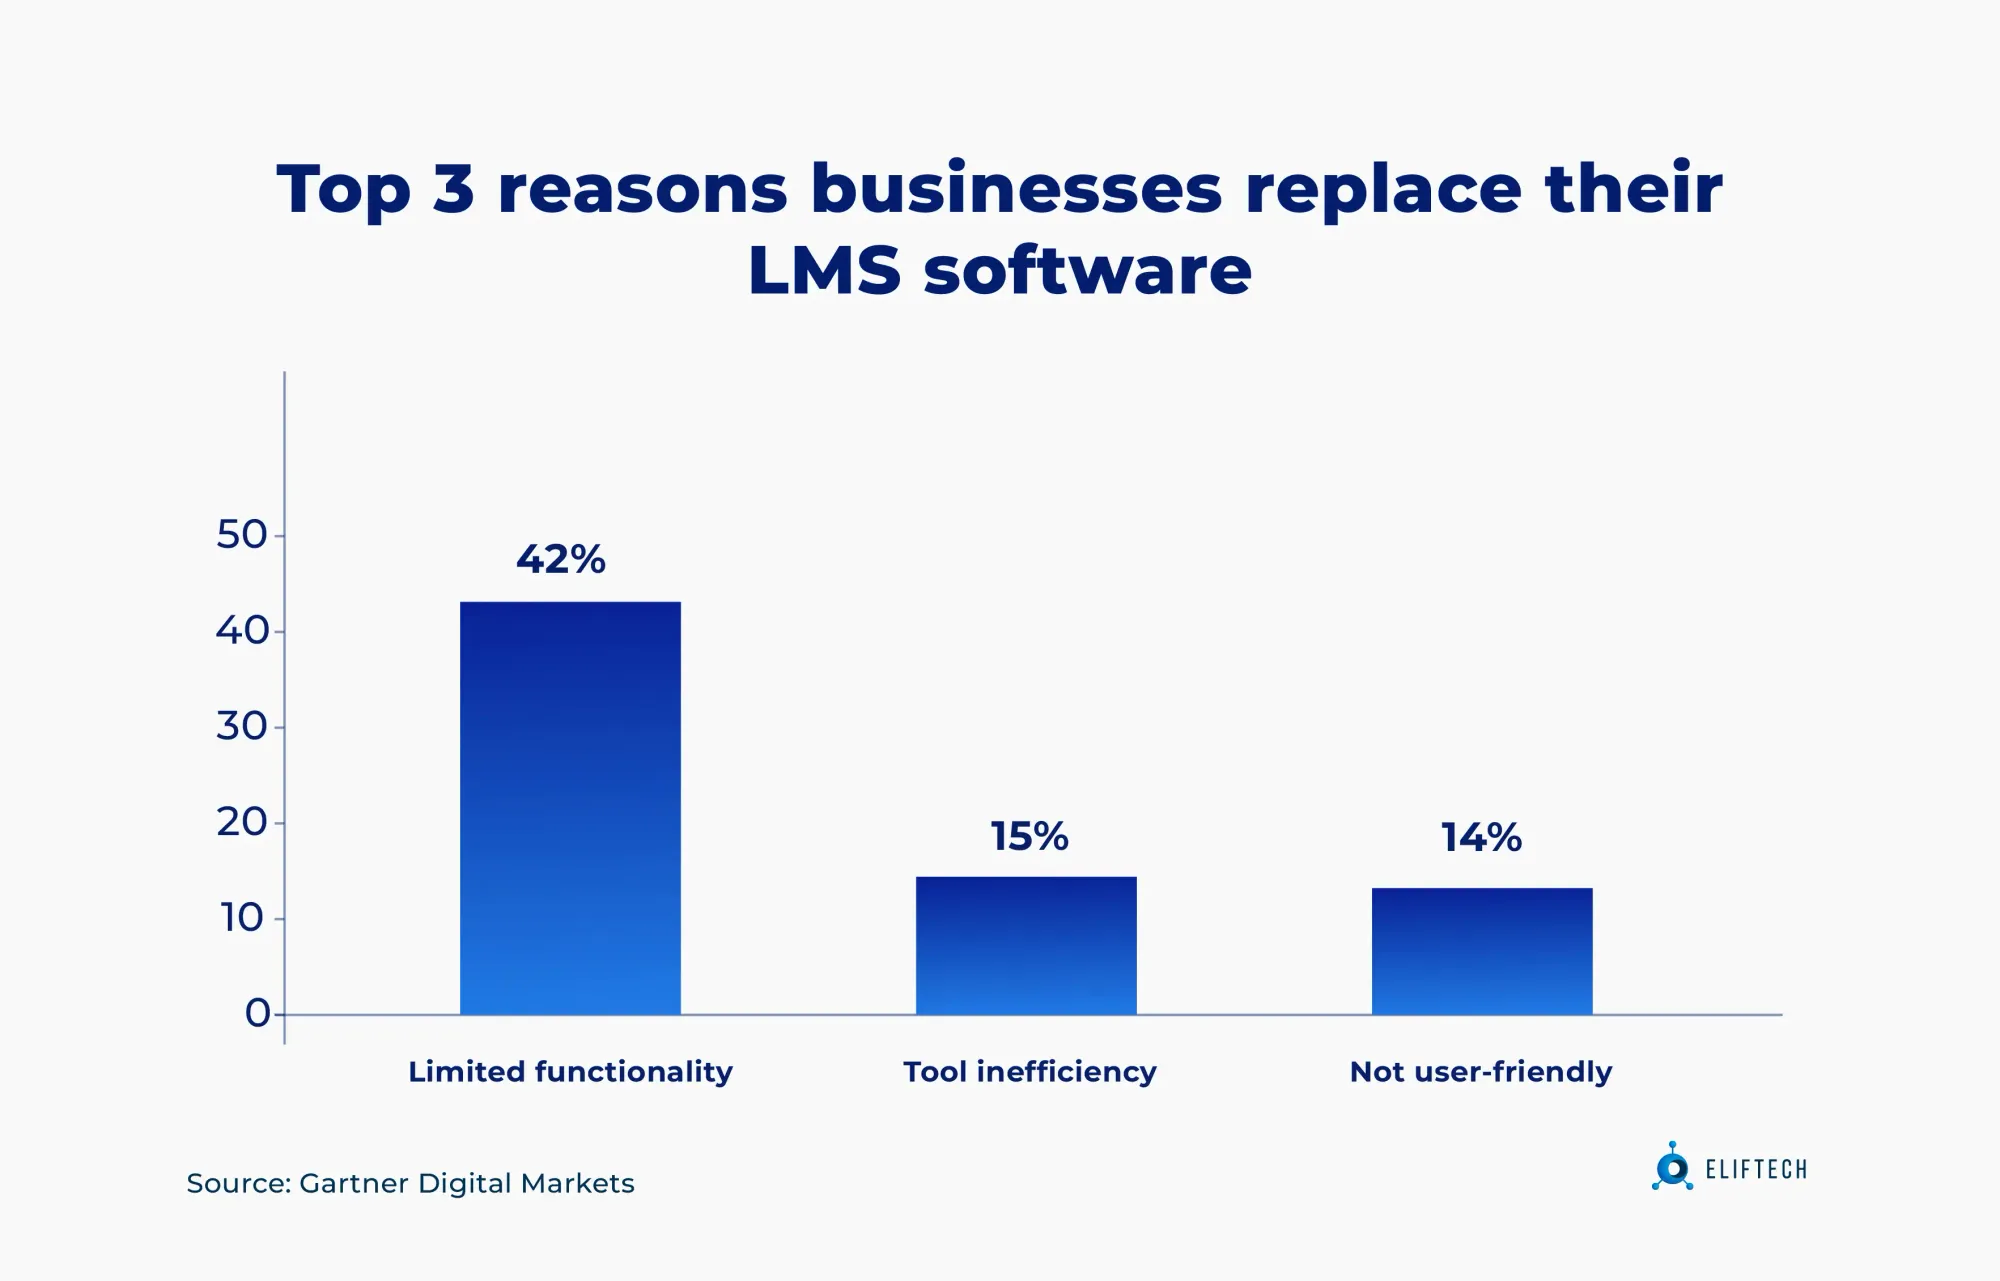 Top 3 motivations for businesses to replace their LMS